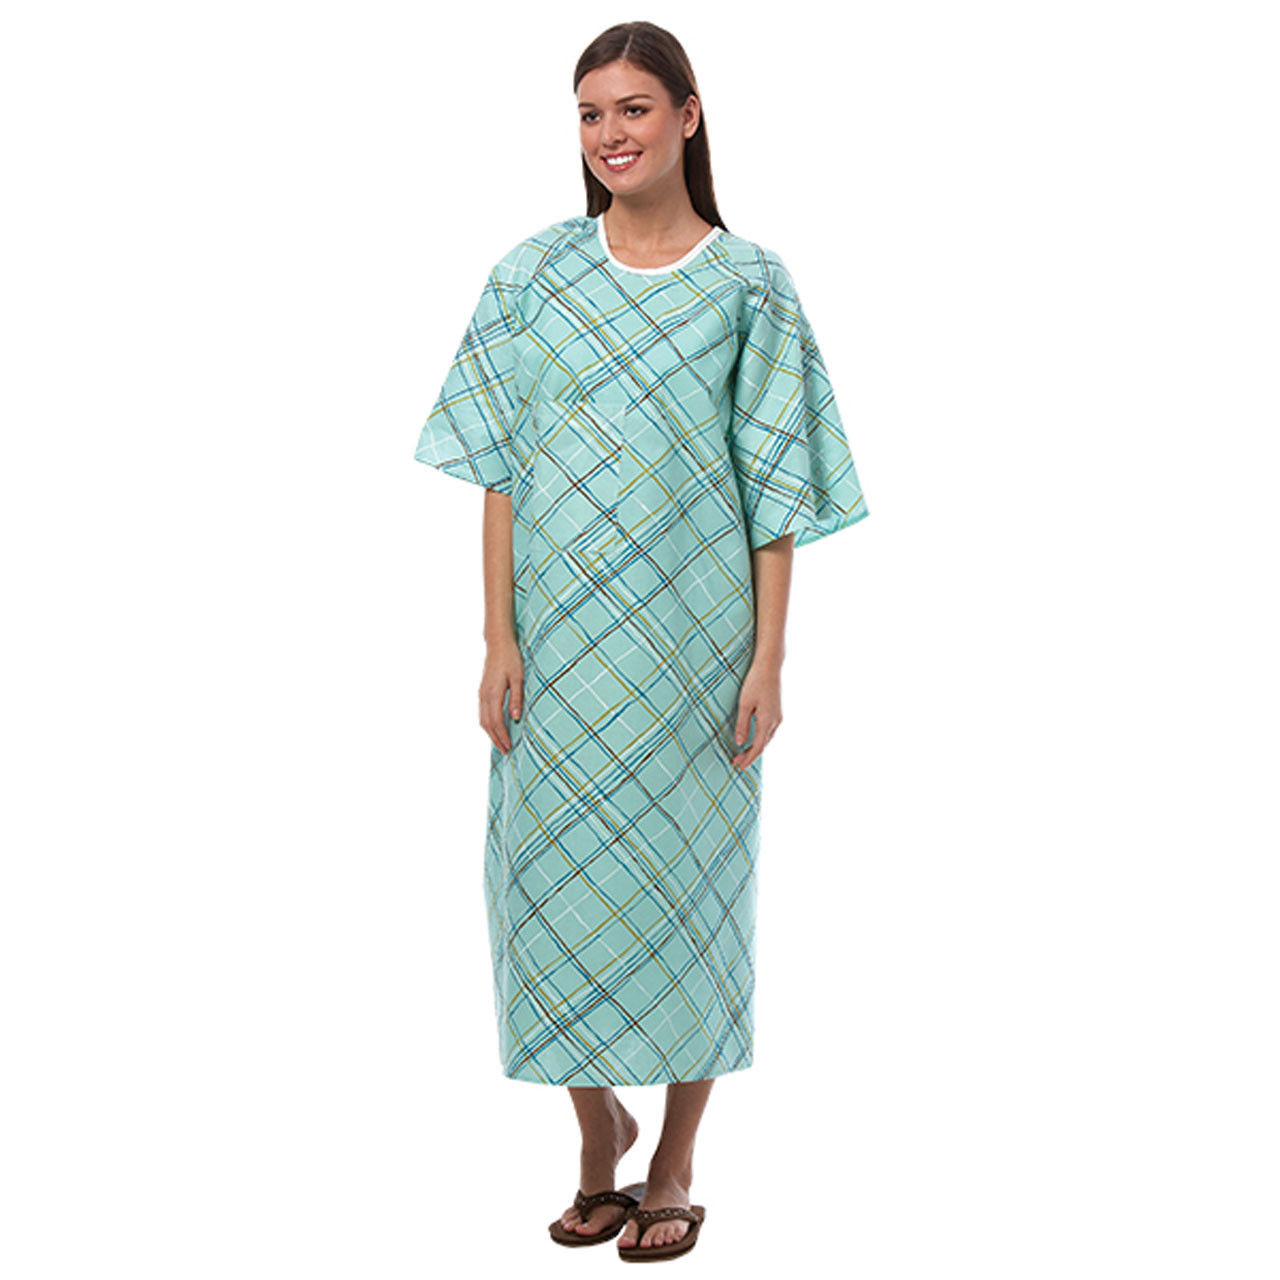 How long are these fashion hospital gowns and what's their sweep?